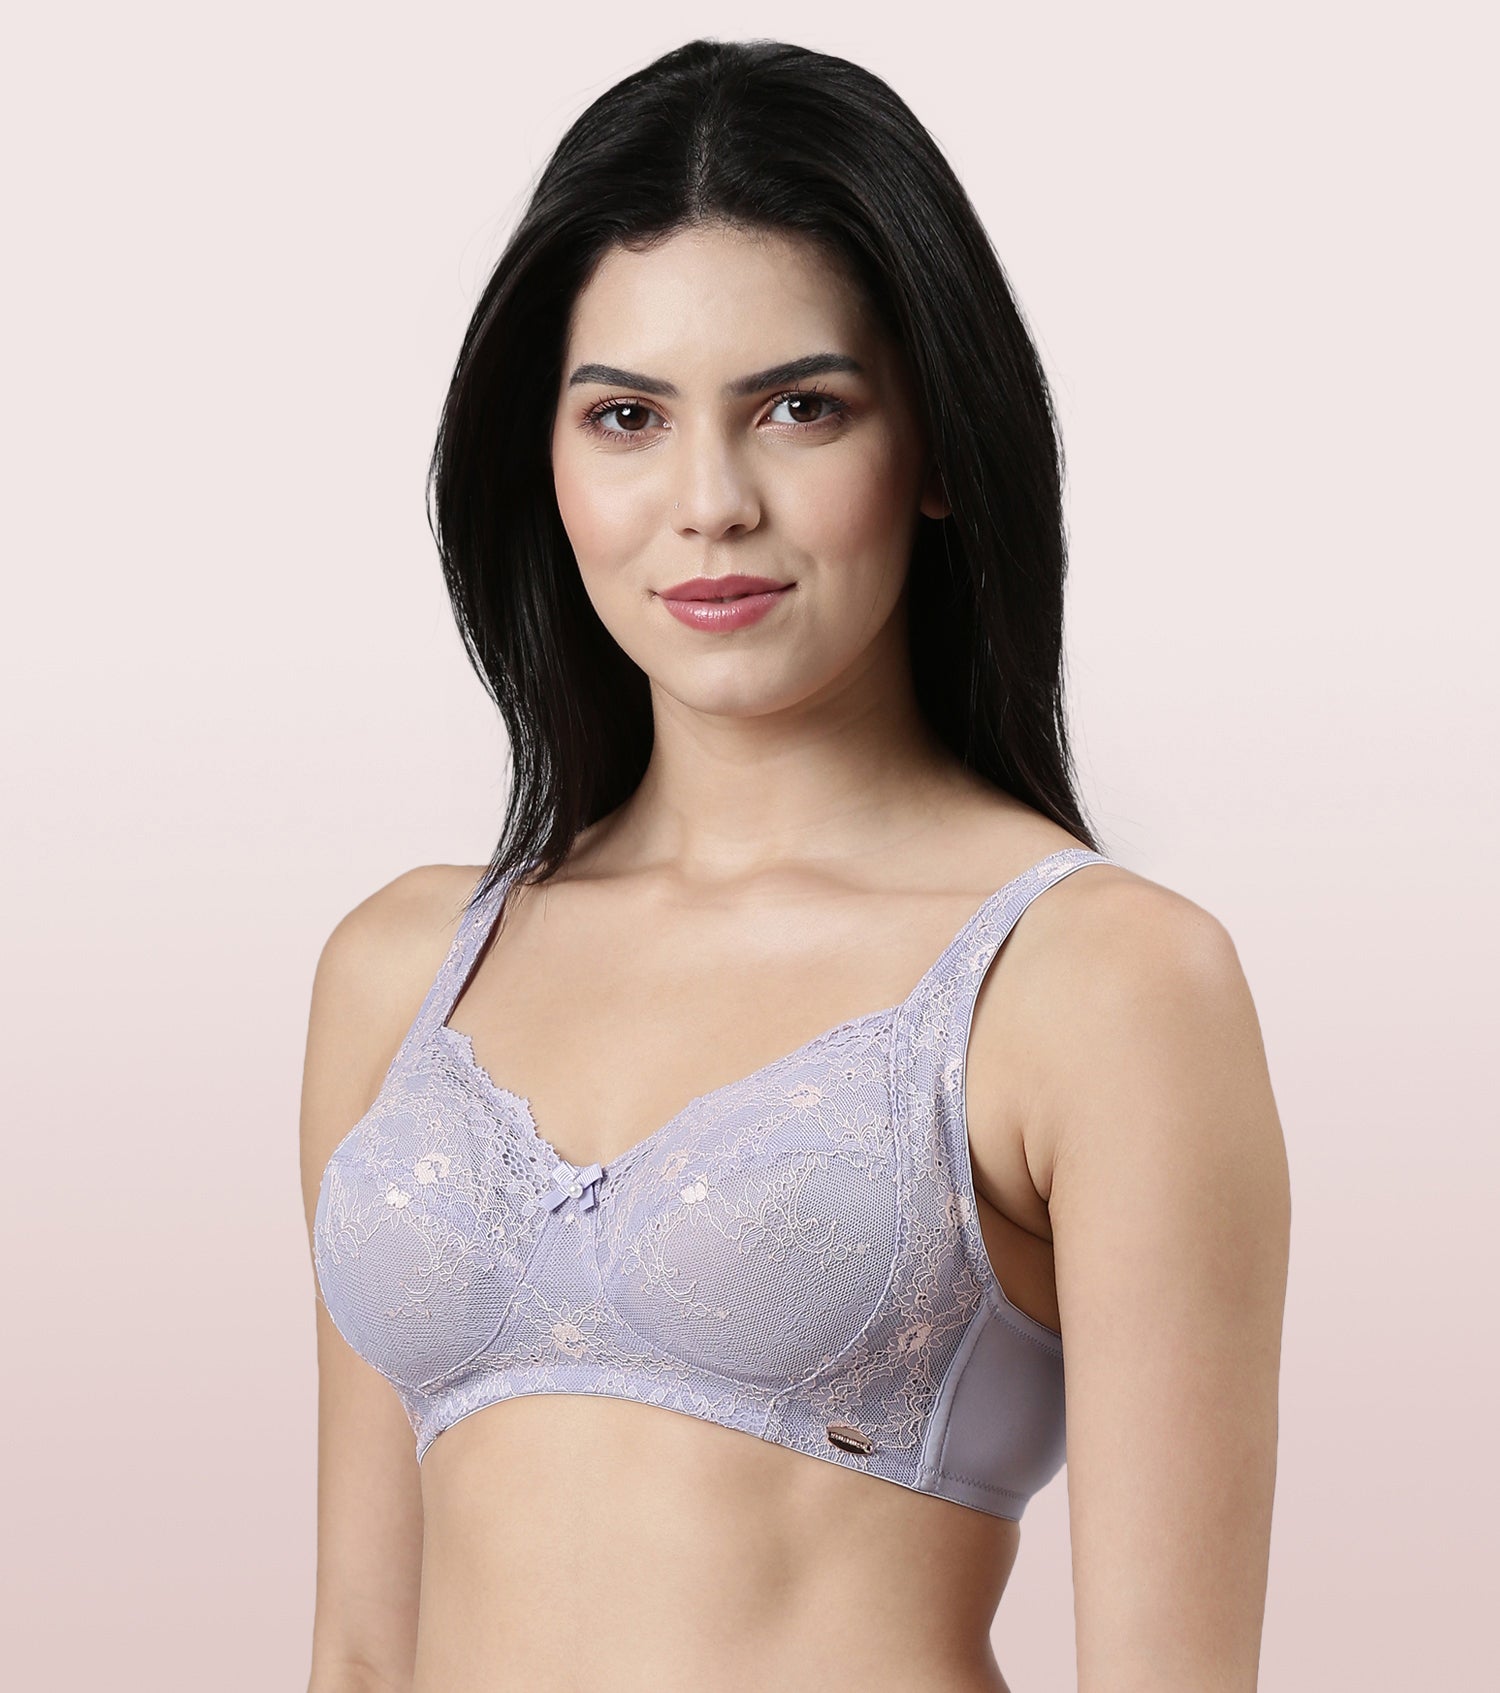 Enamor F130, FLEXI LIGHT PRINTED BUSTIER BRA, PADDED WIRED HIGH COVERAGE